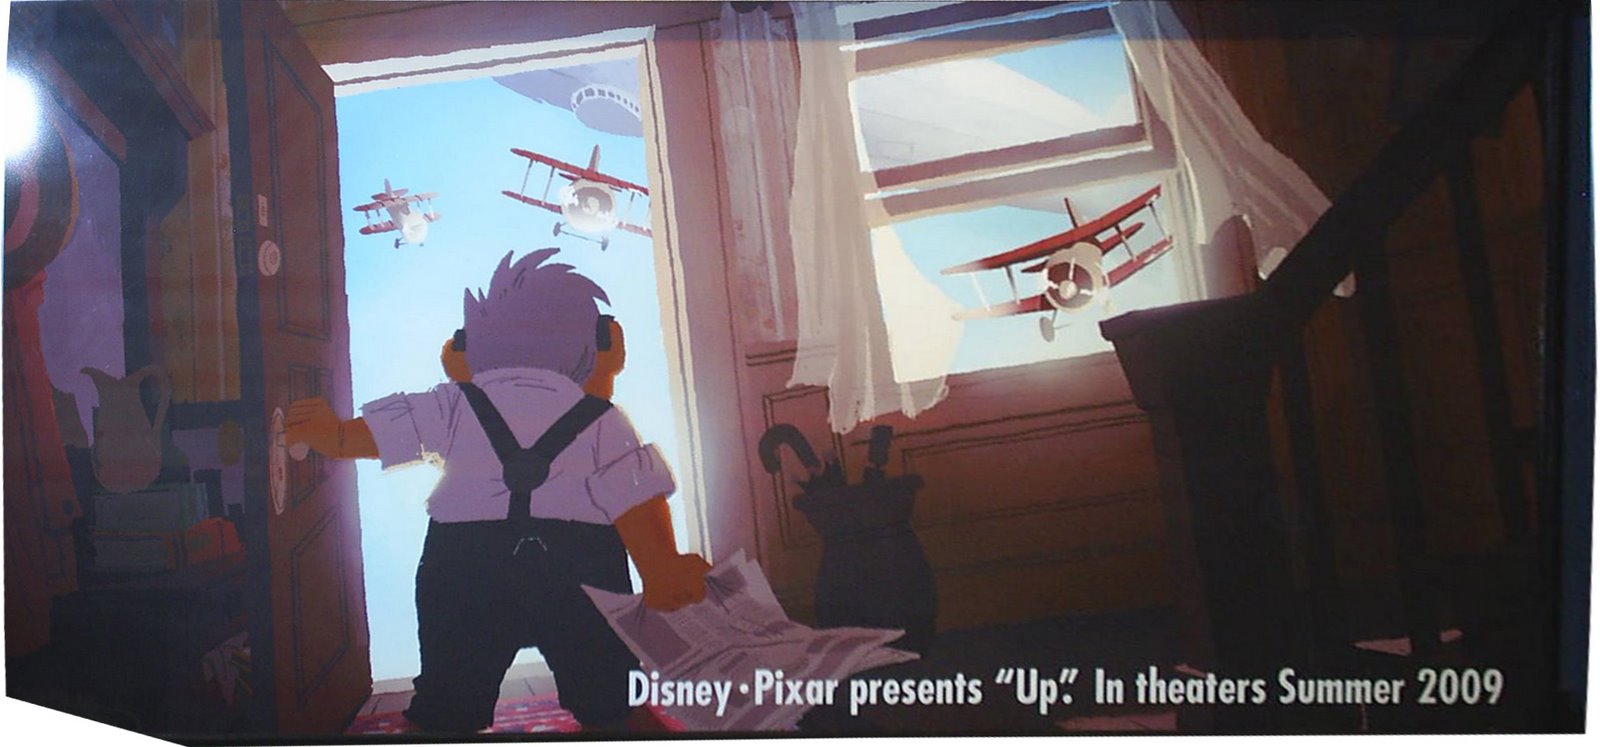 Disney and more: First picture of Pixar 2009 animated 